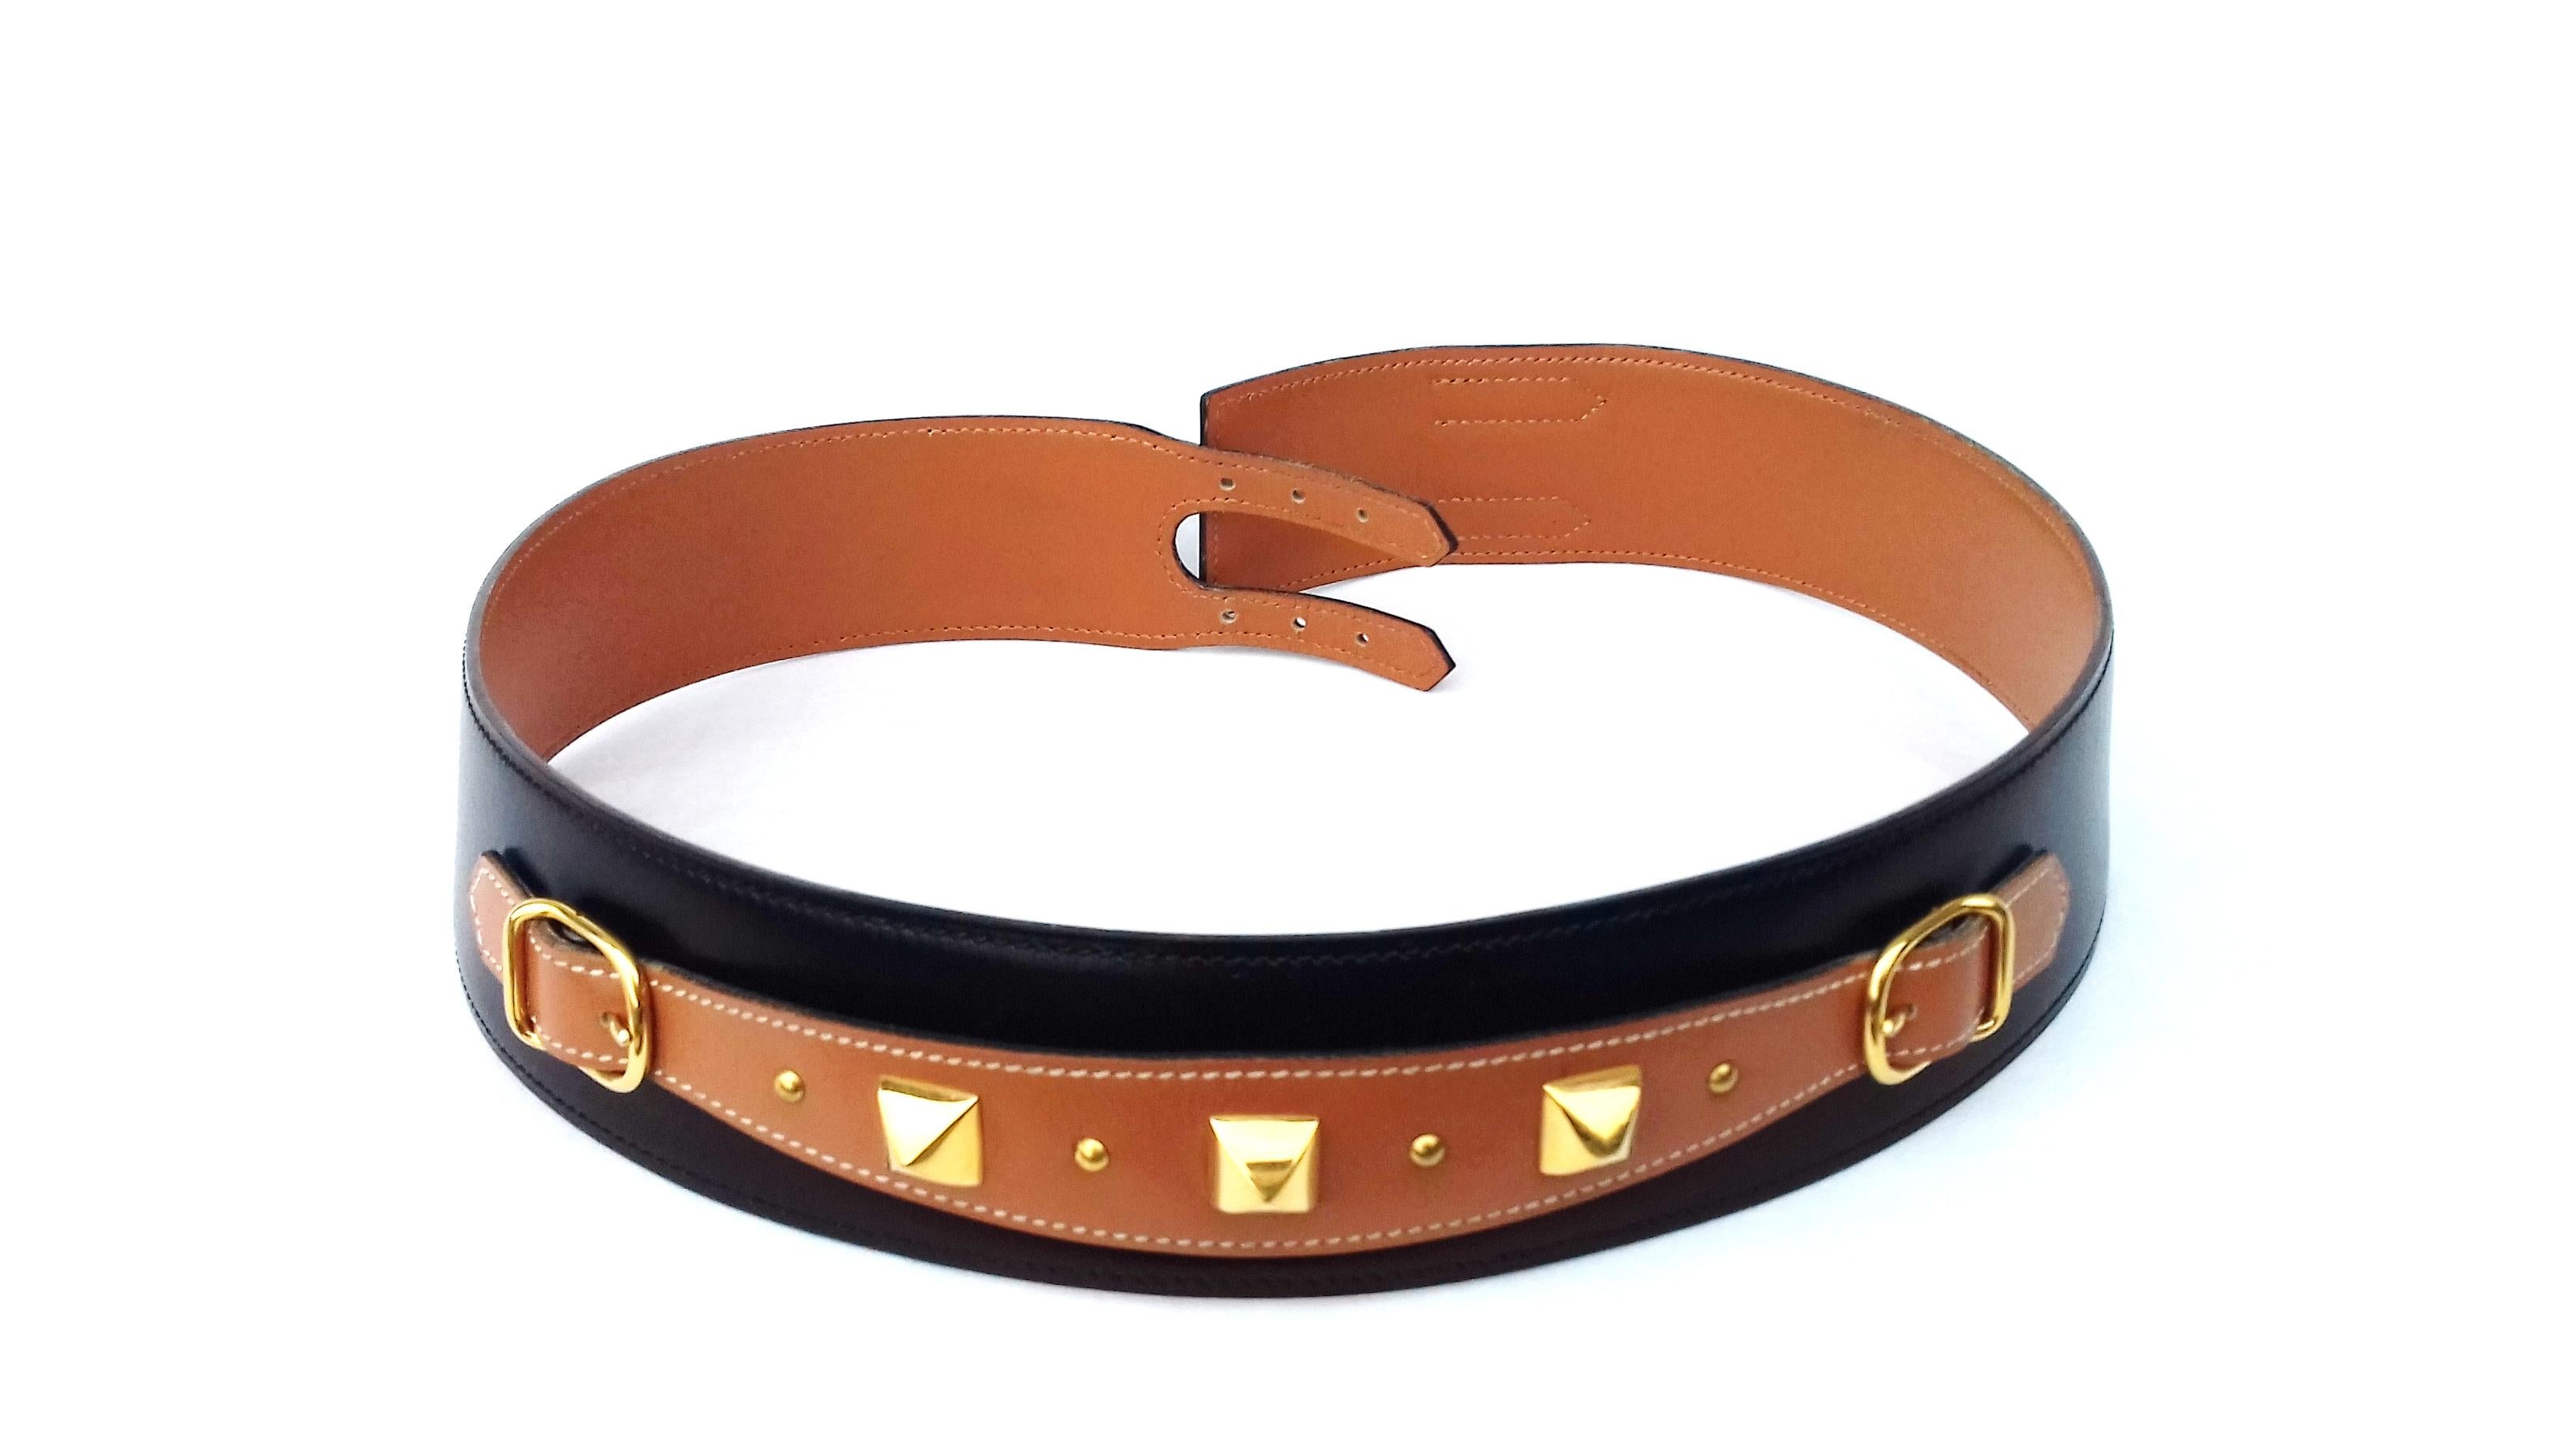 Beautiful Authentic Vintage Hermès Belt

Made in France

Stamp O in a circle (1985)

Made of Black Box Leather (smooth)

The front ornament is made of Gold smooth Leather, adorned with pyramids (